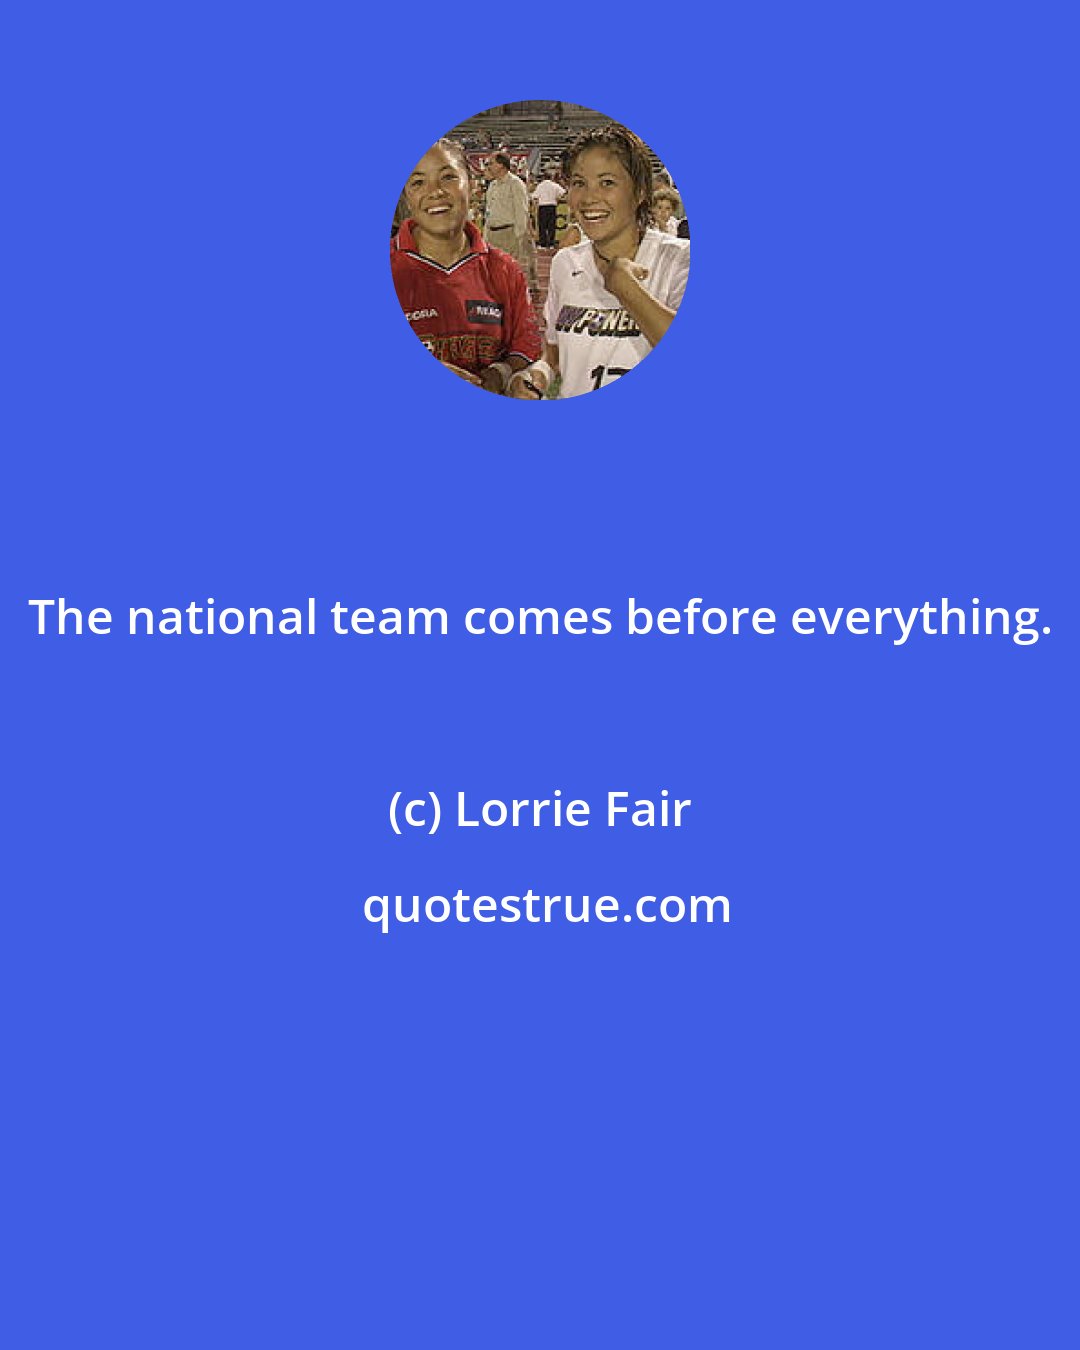 Lorrie Fair: The national team comes before everything.